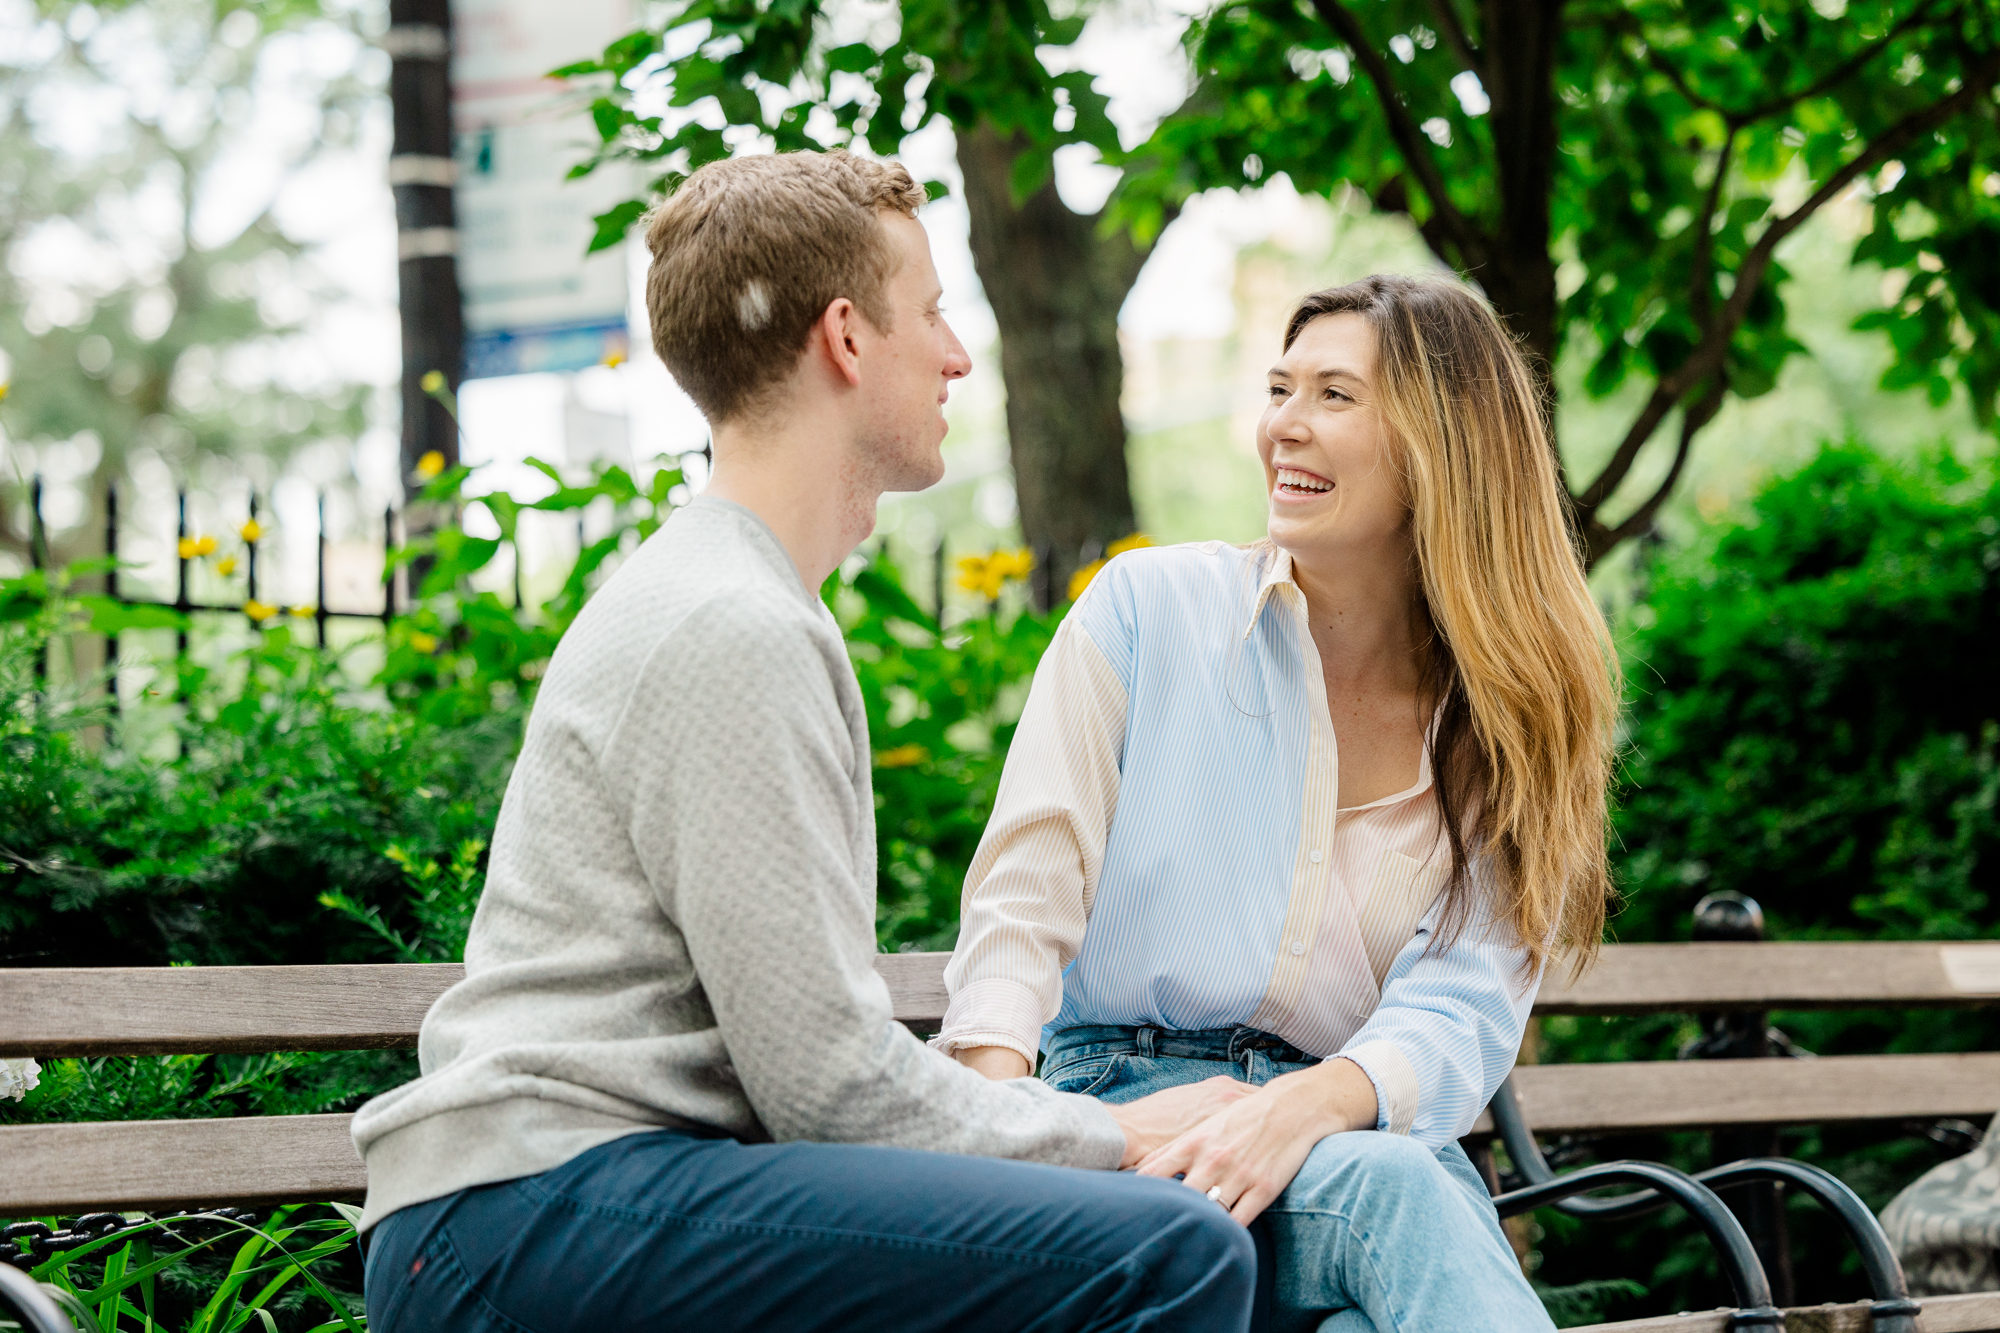 Cheerful Summer Engagement Photography in the West Village